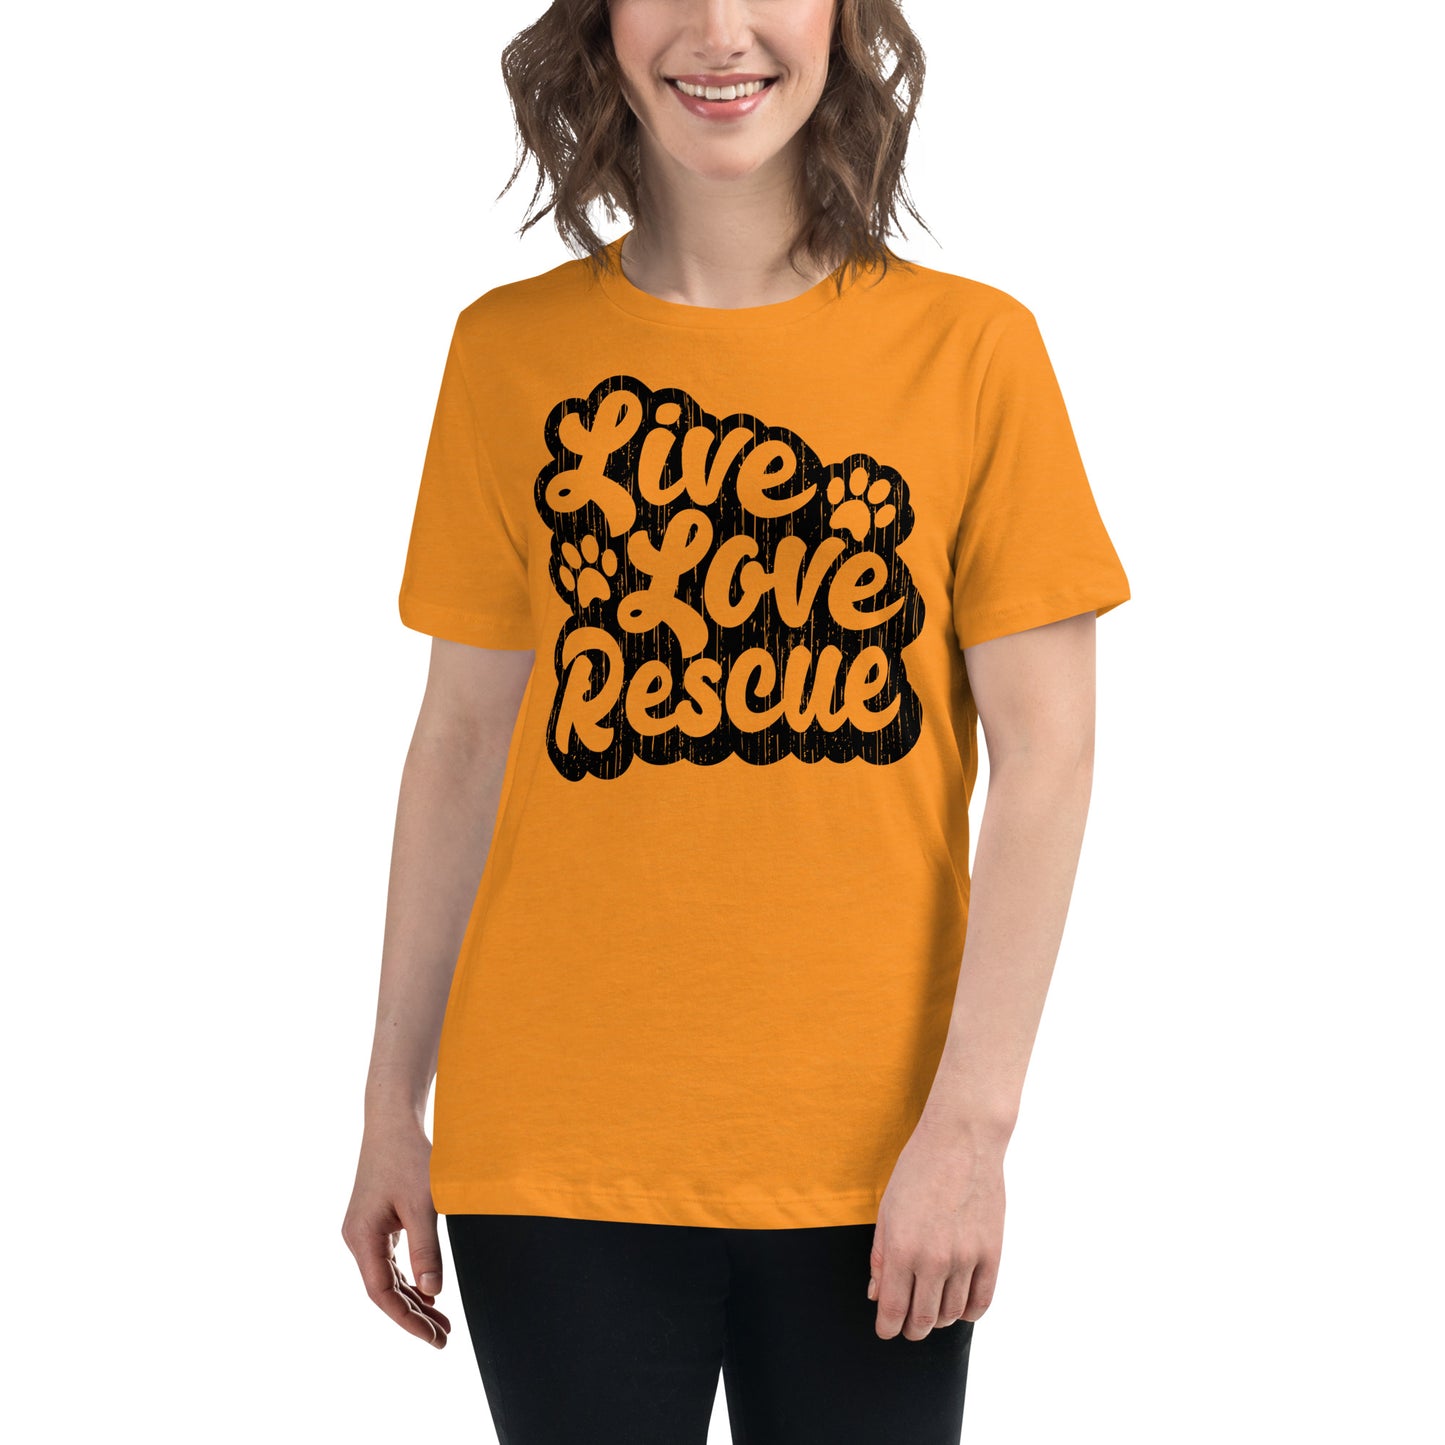 Live love rescue retro women’s relaxed fit t-shirts by Dog Artistry heather marmalade color